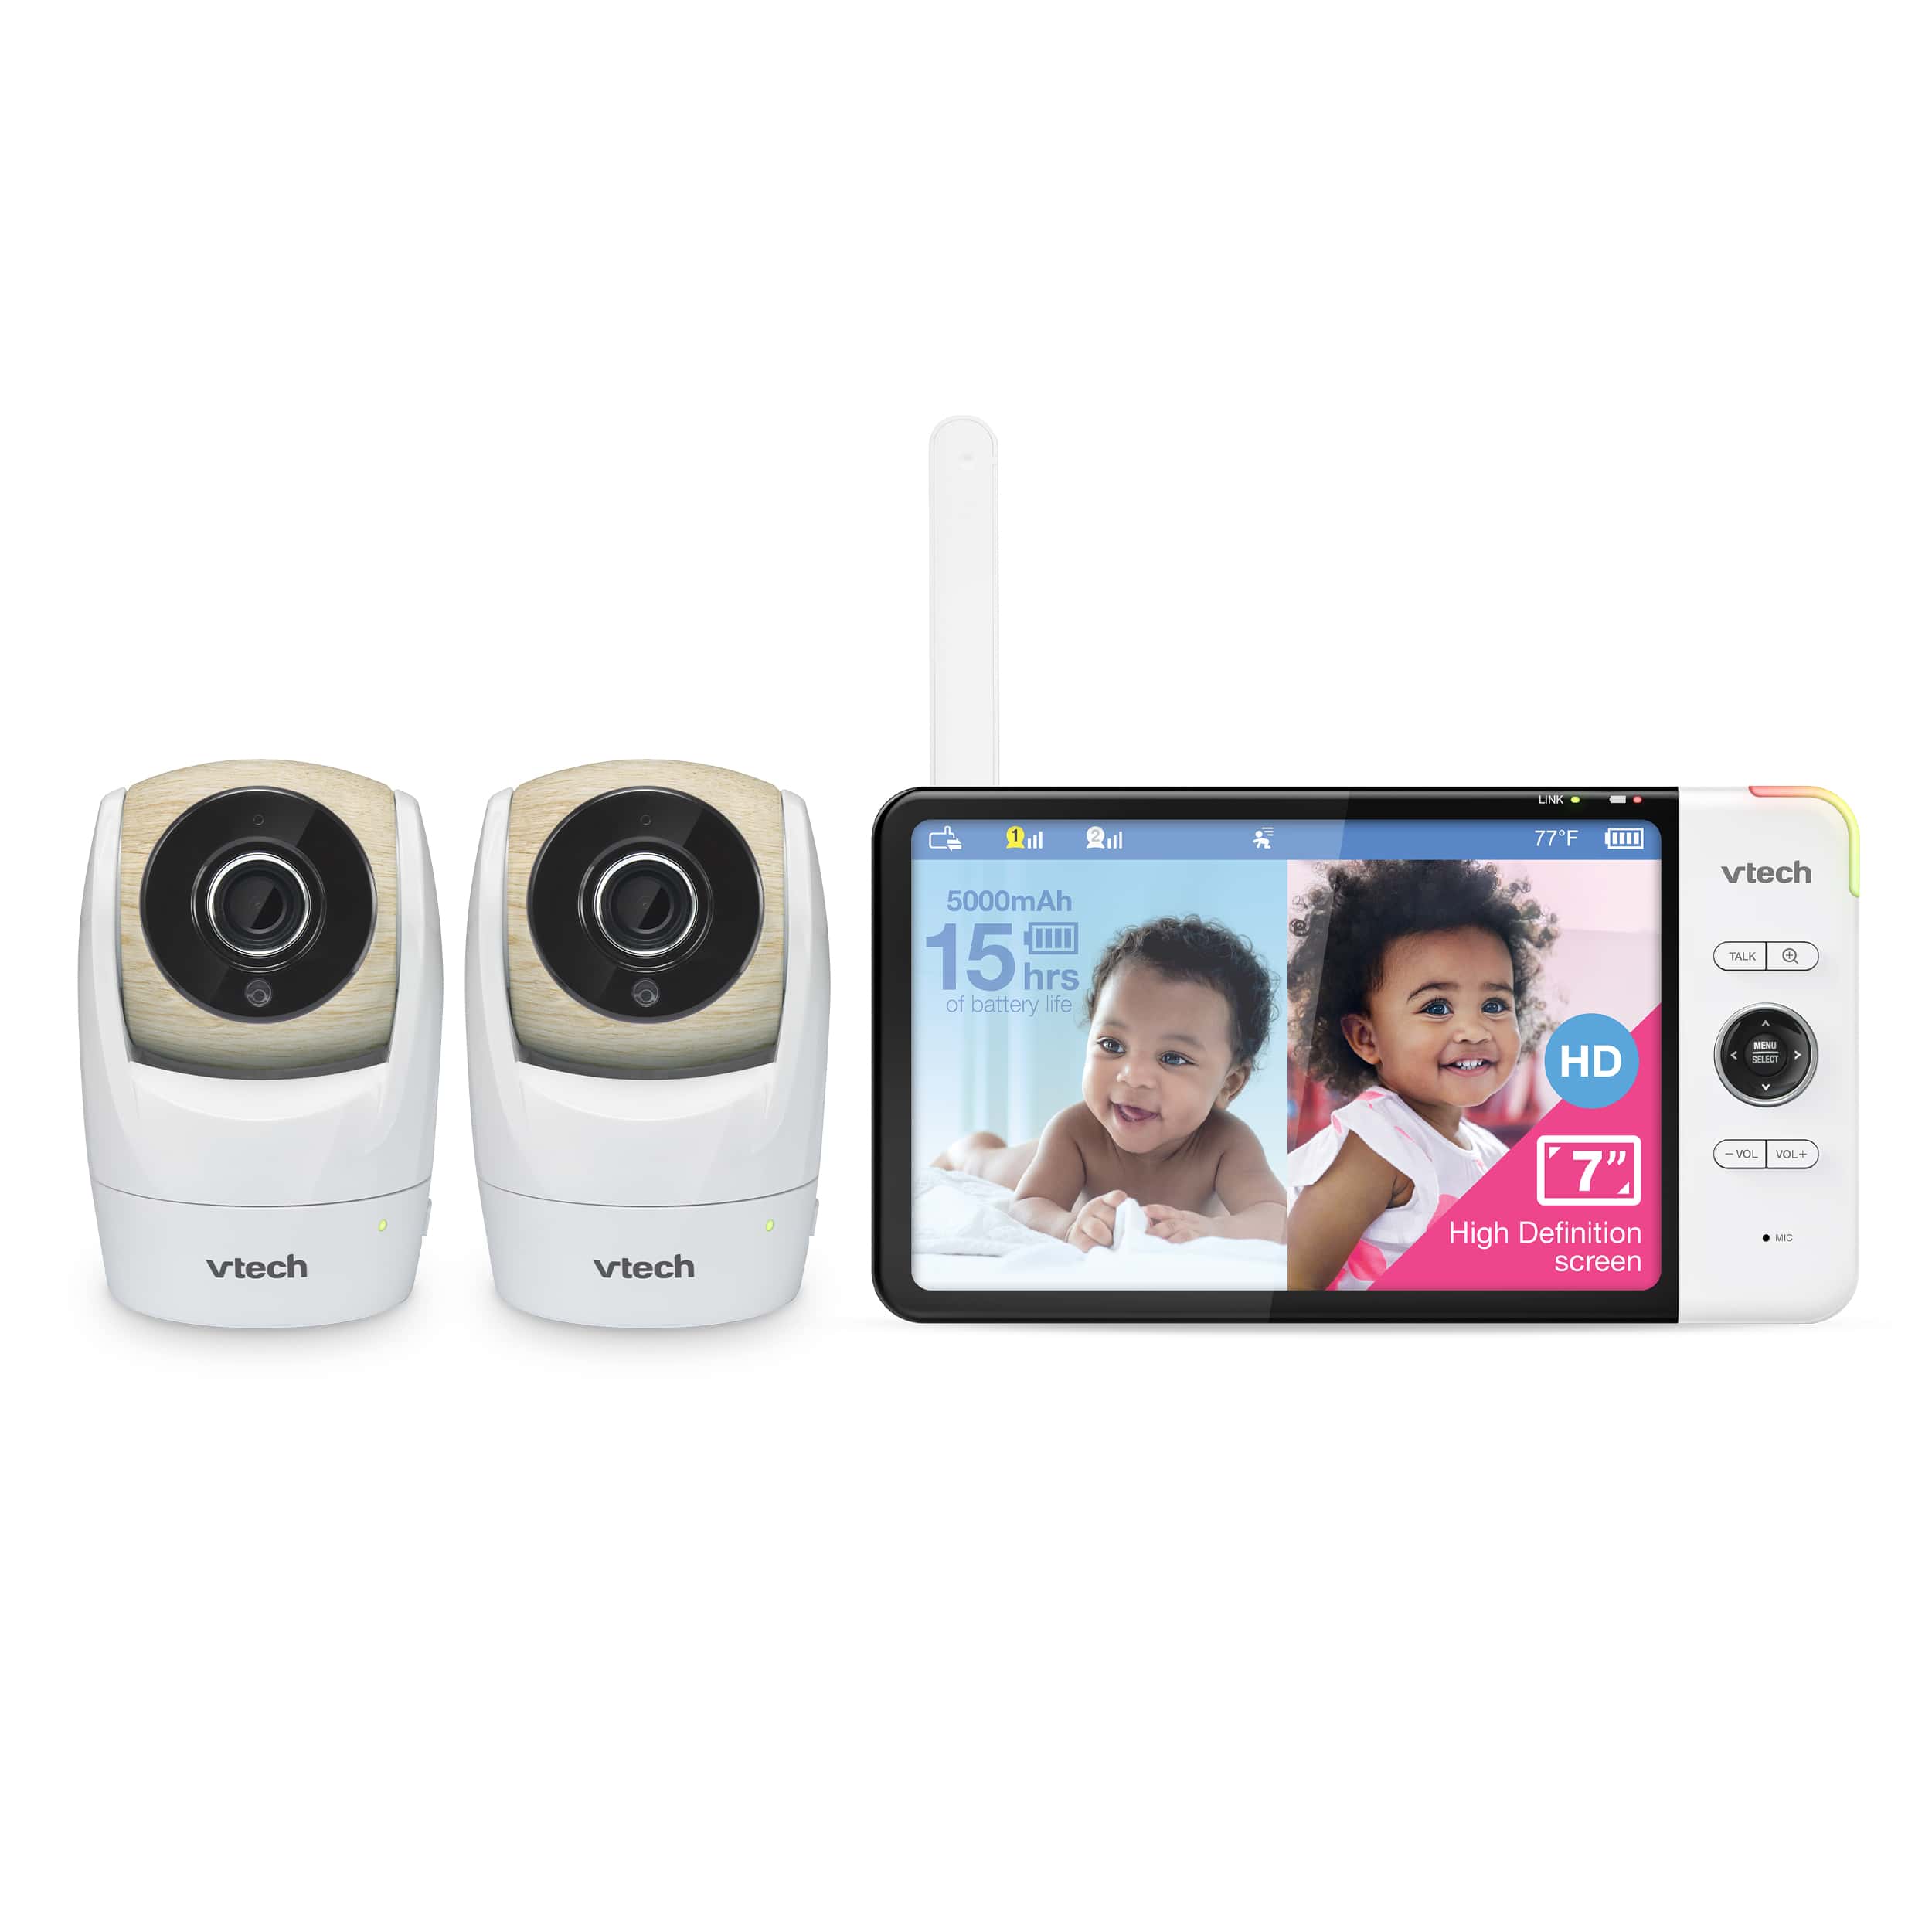 2 Camera Video Baby Monitor with 7" High Definition 720p Display, 360 degree Panoramic Viewing Pan & Tilt HD Camera - view 1